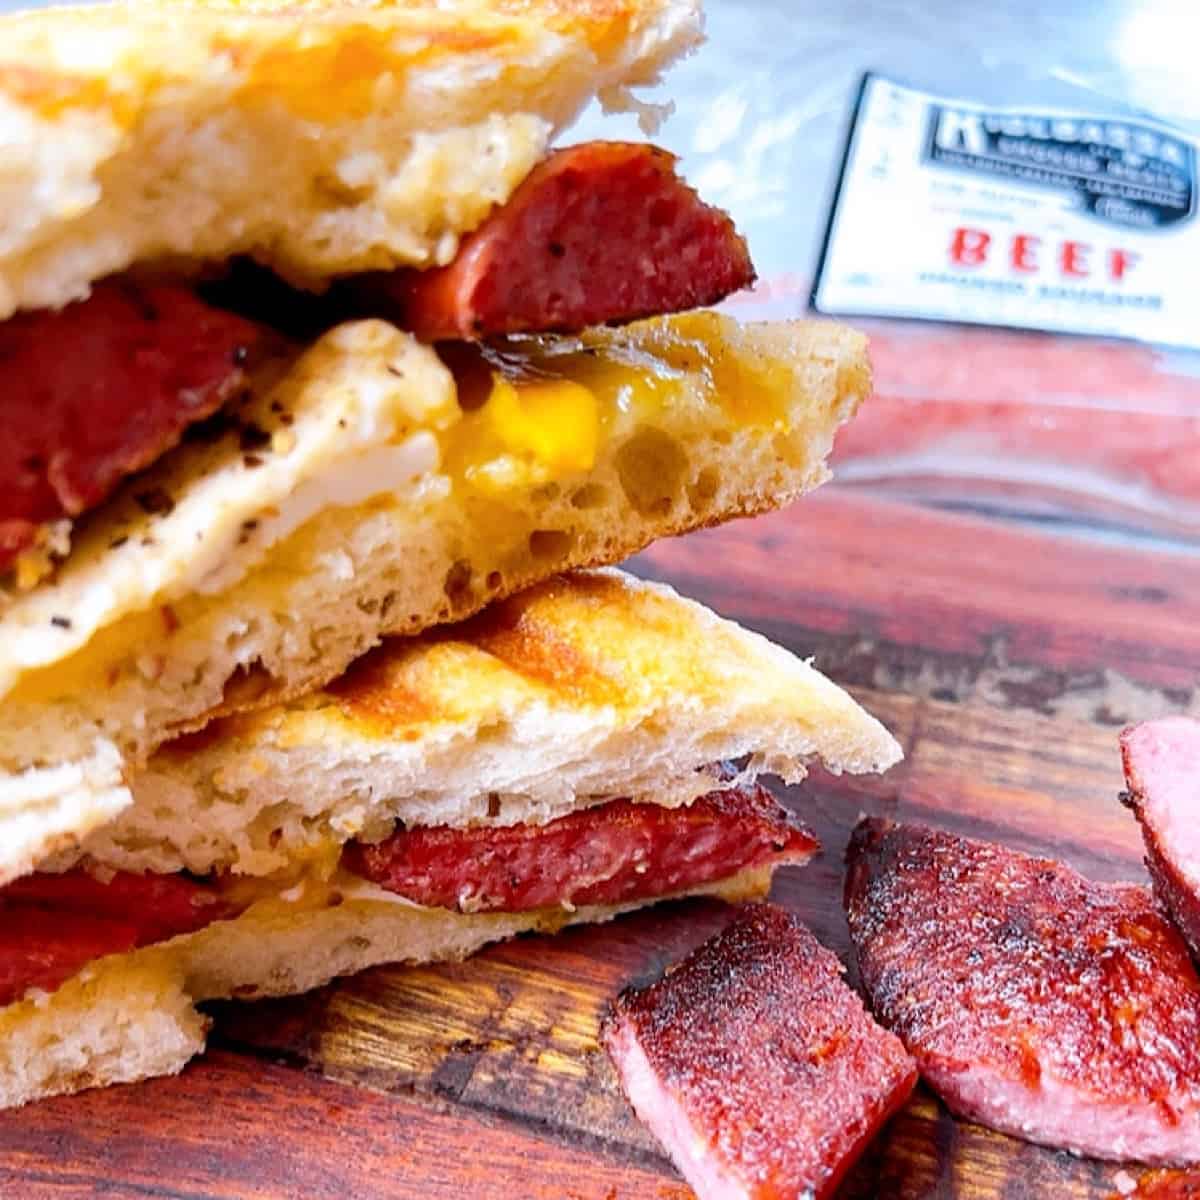 Smoked Sausage Breakfast Sandwich Open Faced and stacked with brand packaging in background